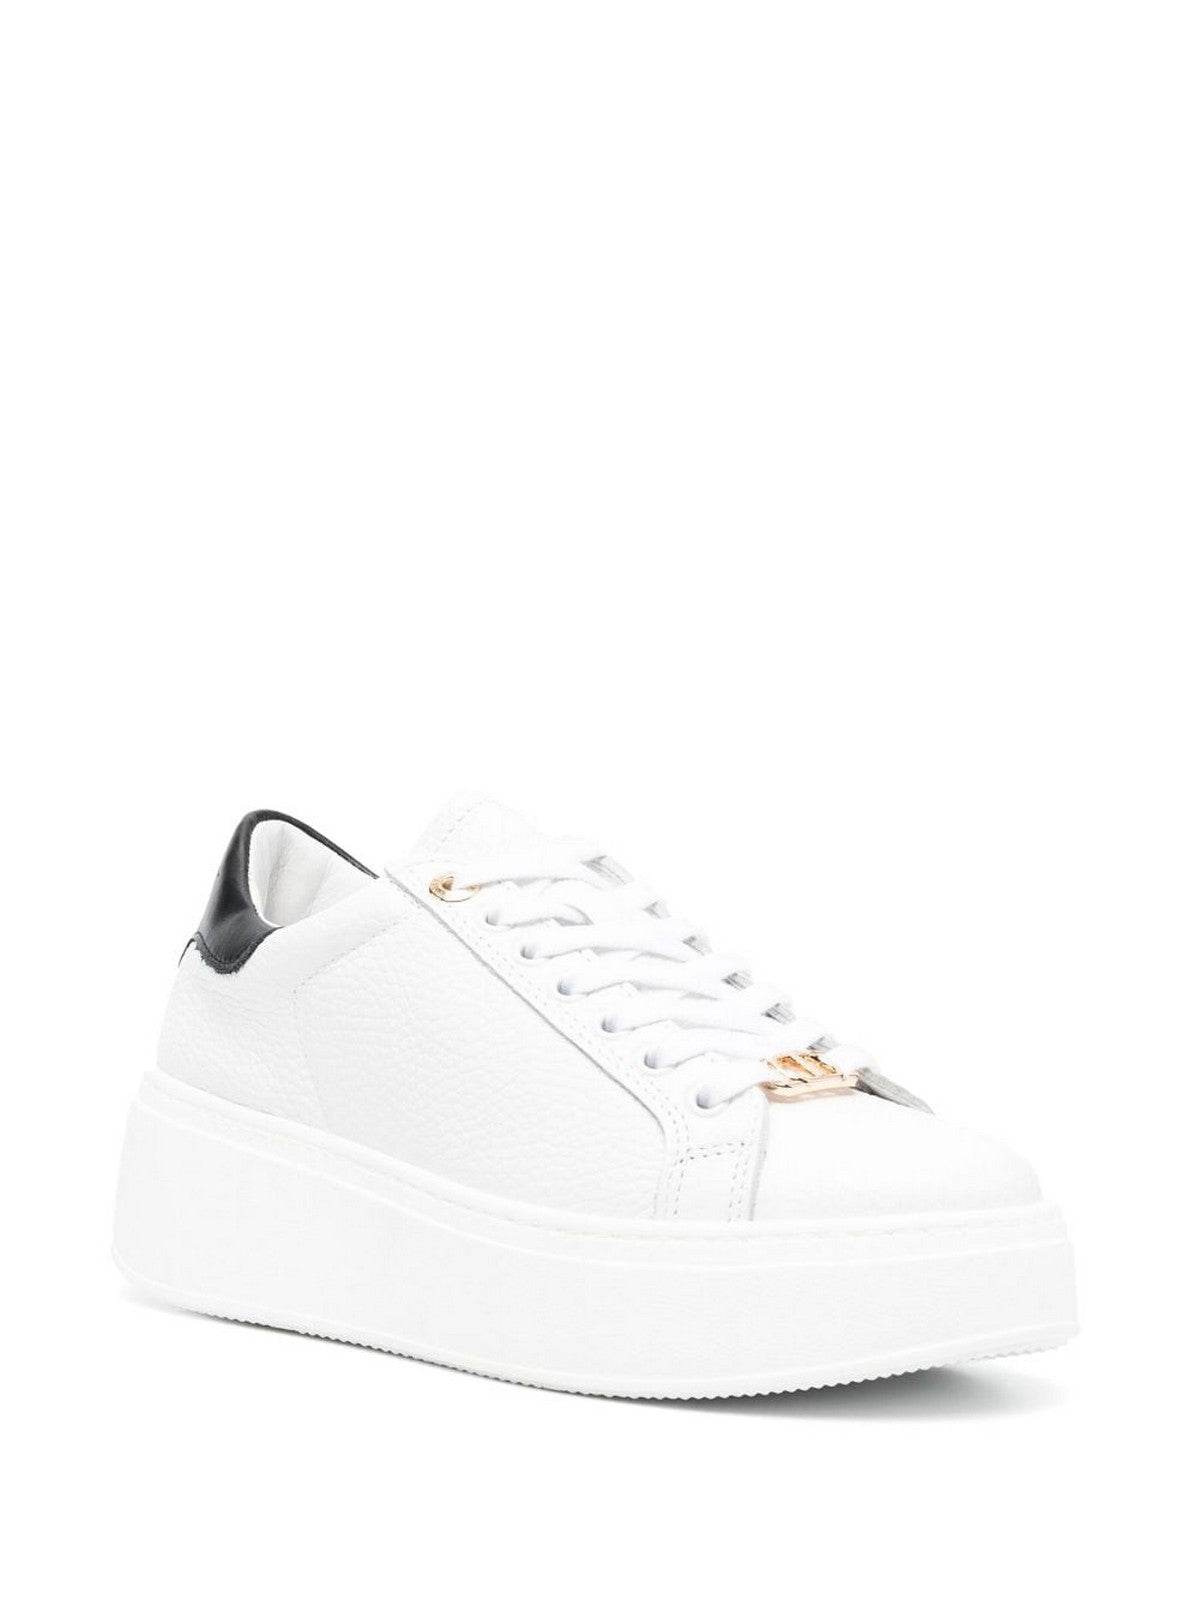 TWINSET Sneaker Donna  232TCP300 01870 Bianco